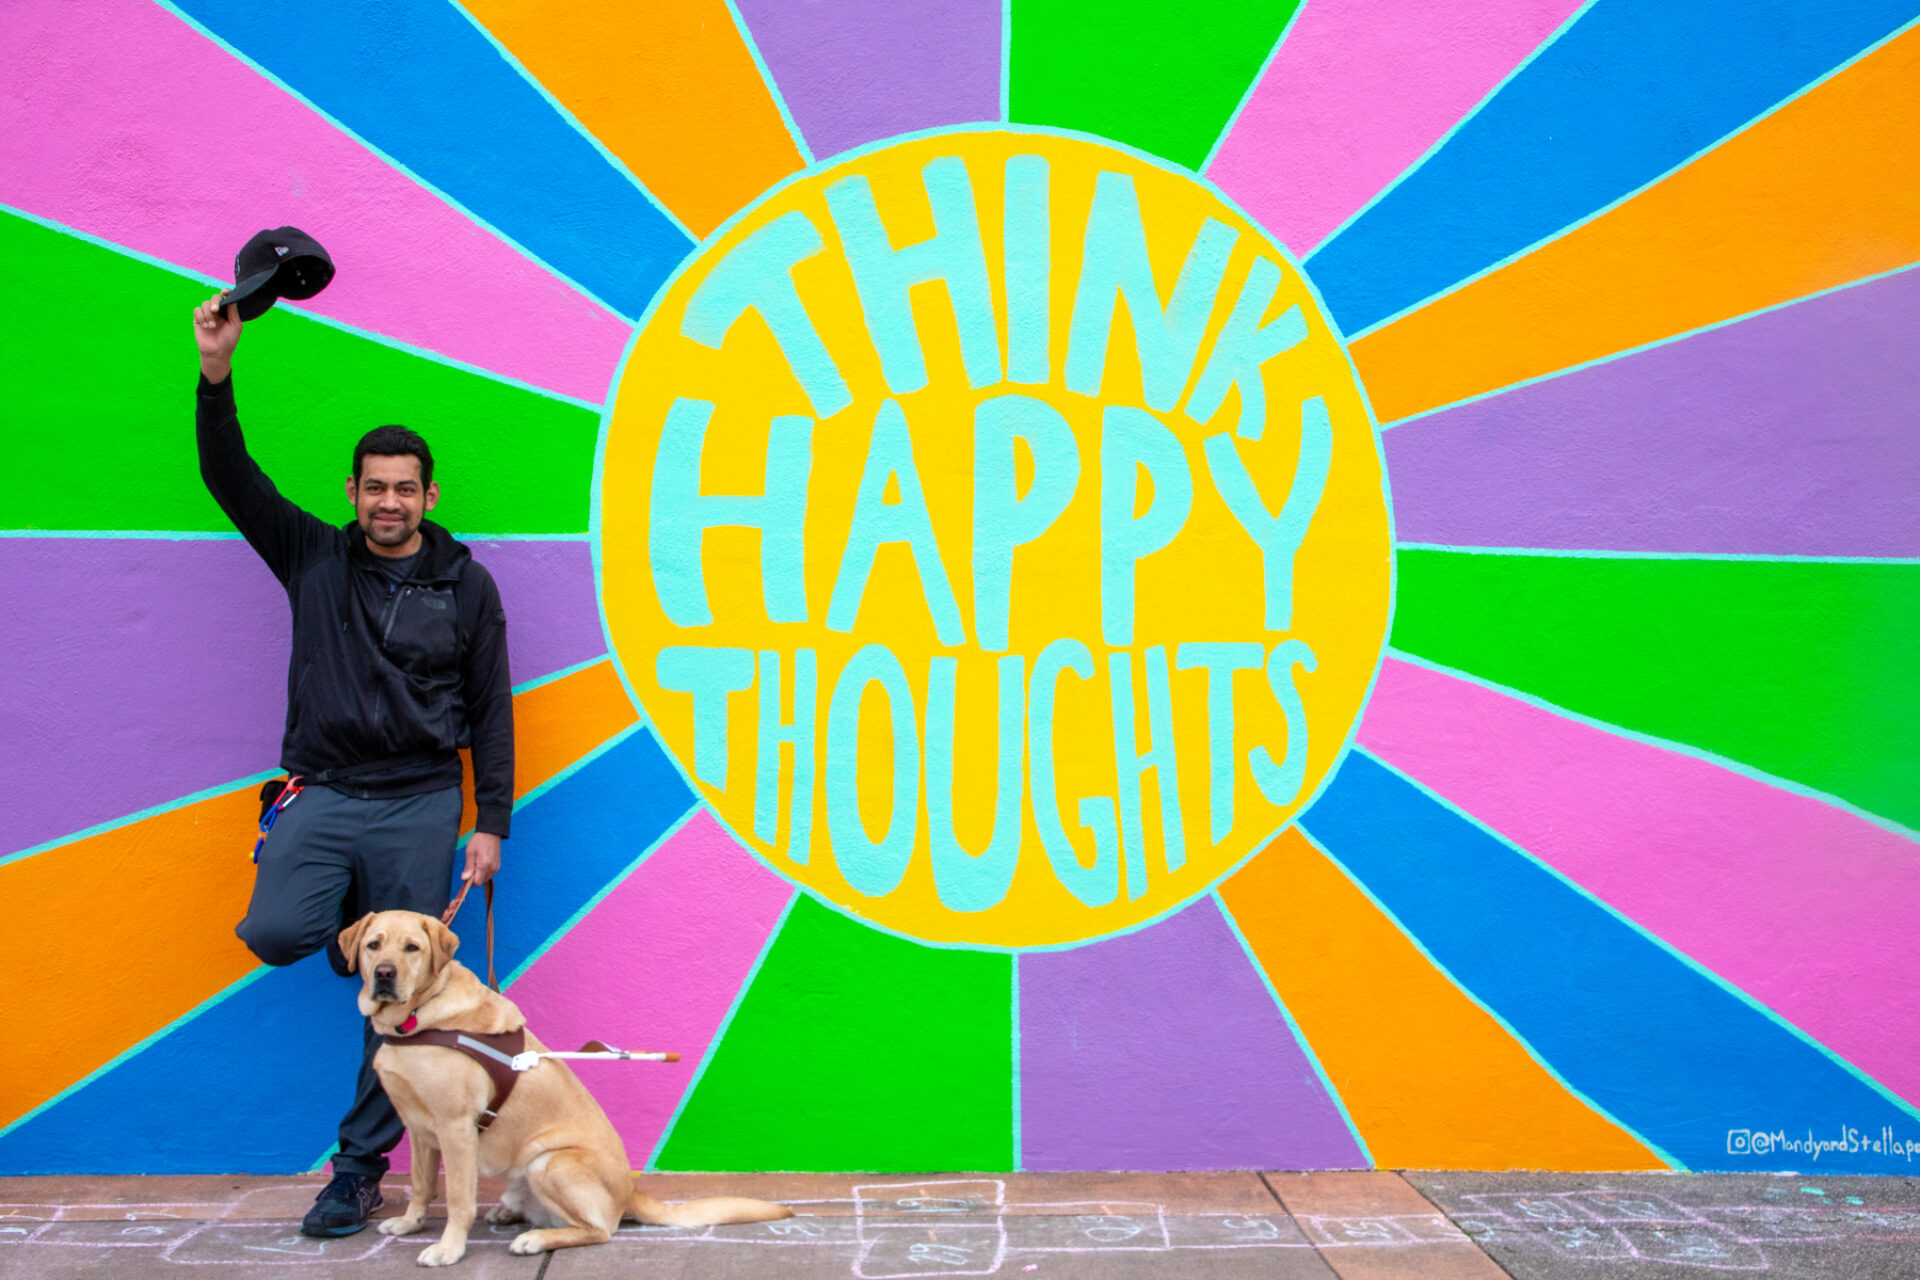 A man with a guide dog stands in front of a colorful sunburst mural that reads "Think Happy Thoughts."